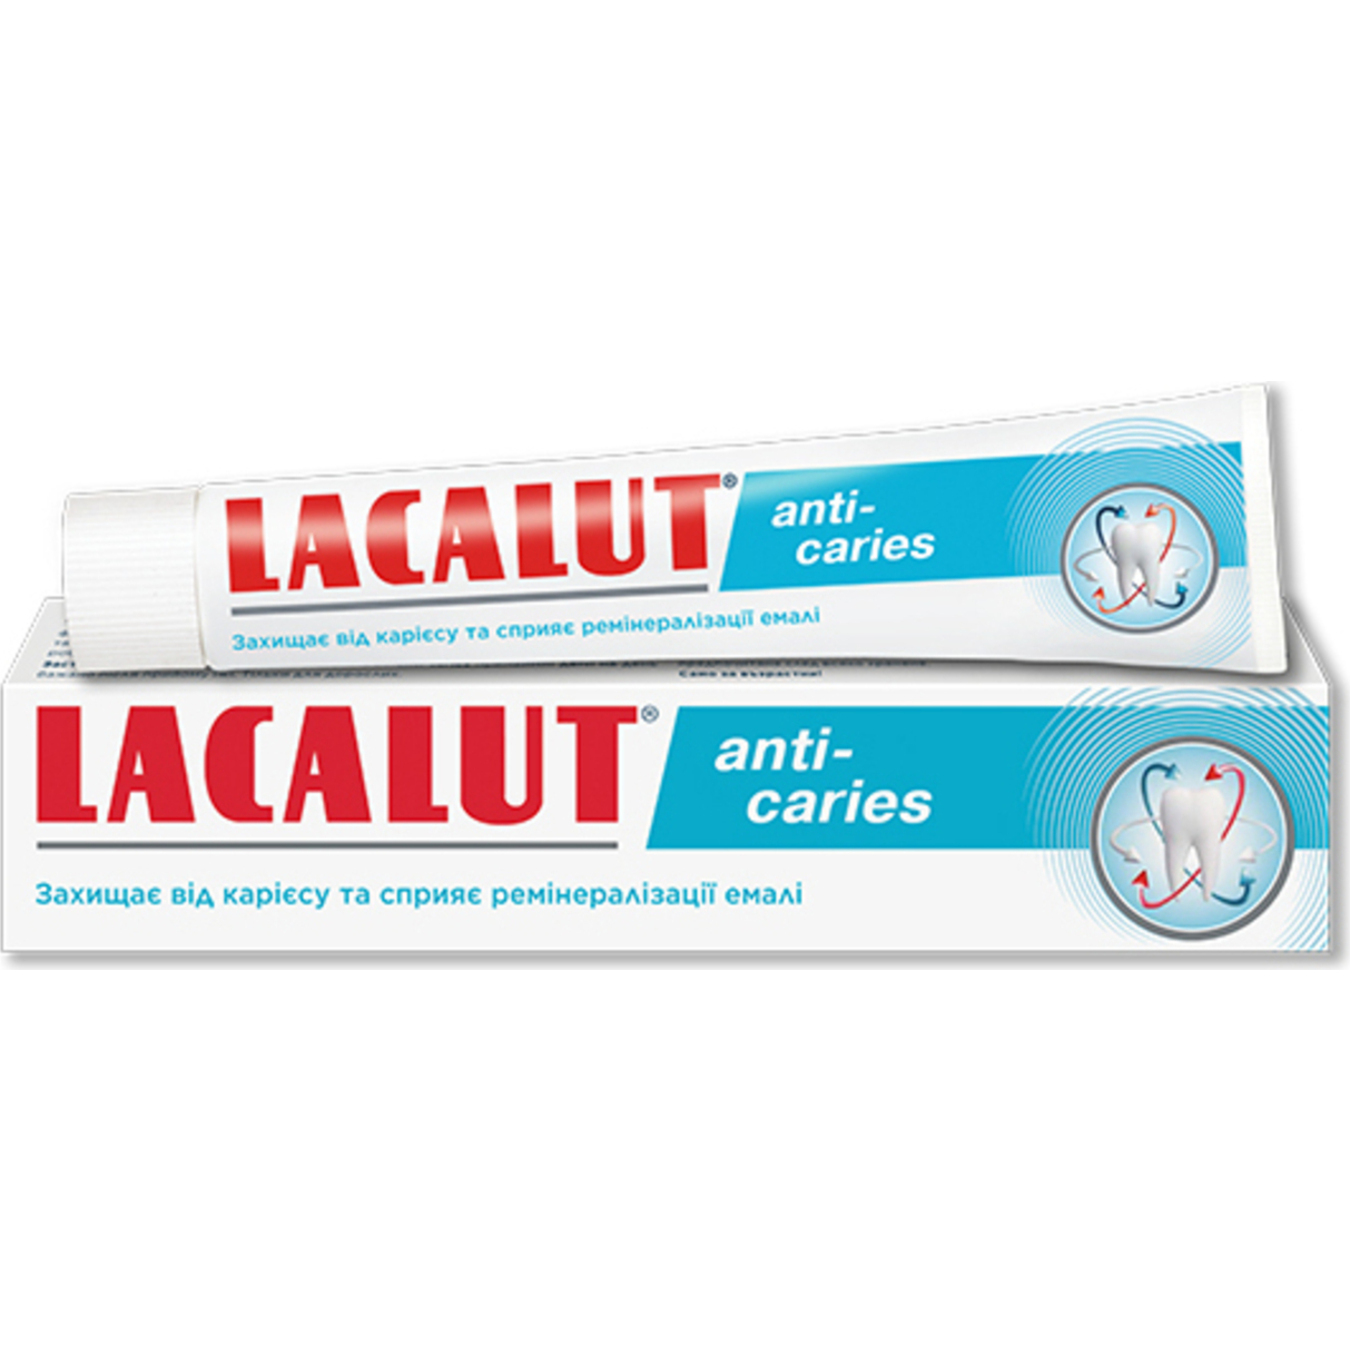 Toothpaste Lacalut Anti-caries 75ml